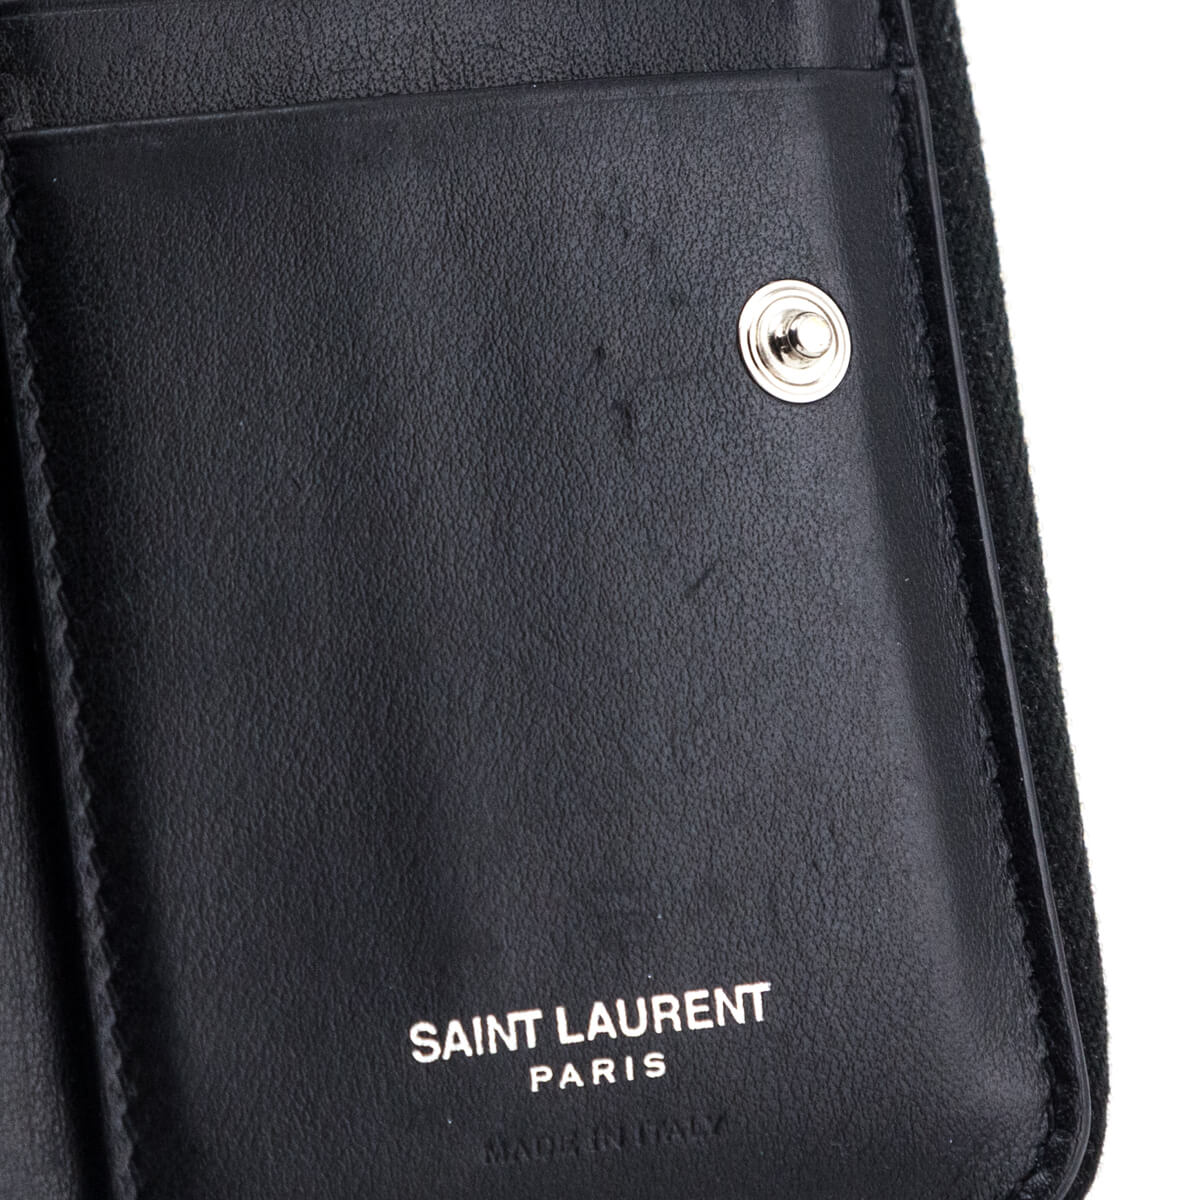 Saint Laurent Black Calfskin Love Patch Zipped Compact Wallet - Love that Bag etc - Preowned Authentic Designer Handbags & Preloved Fashions